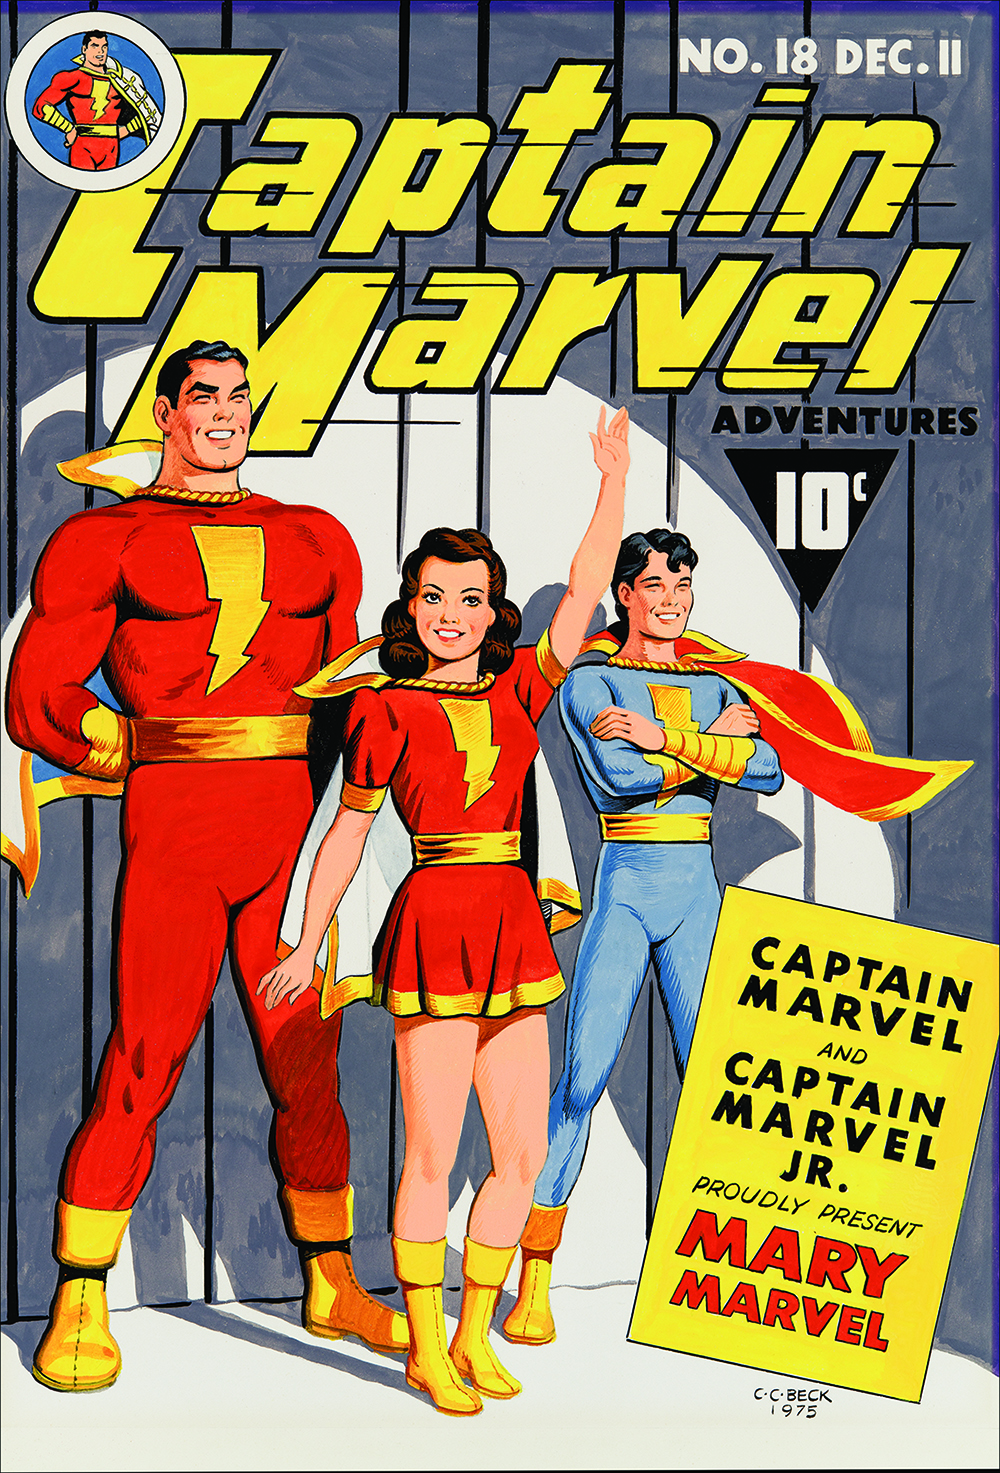 Image: Captain Marvel Adventures #18 Re-creation by C.C. Beck